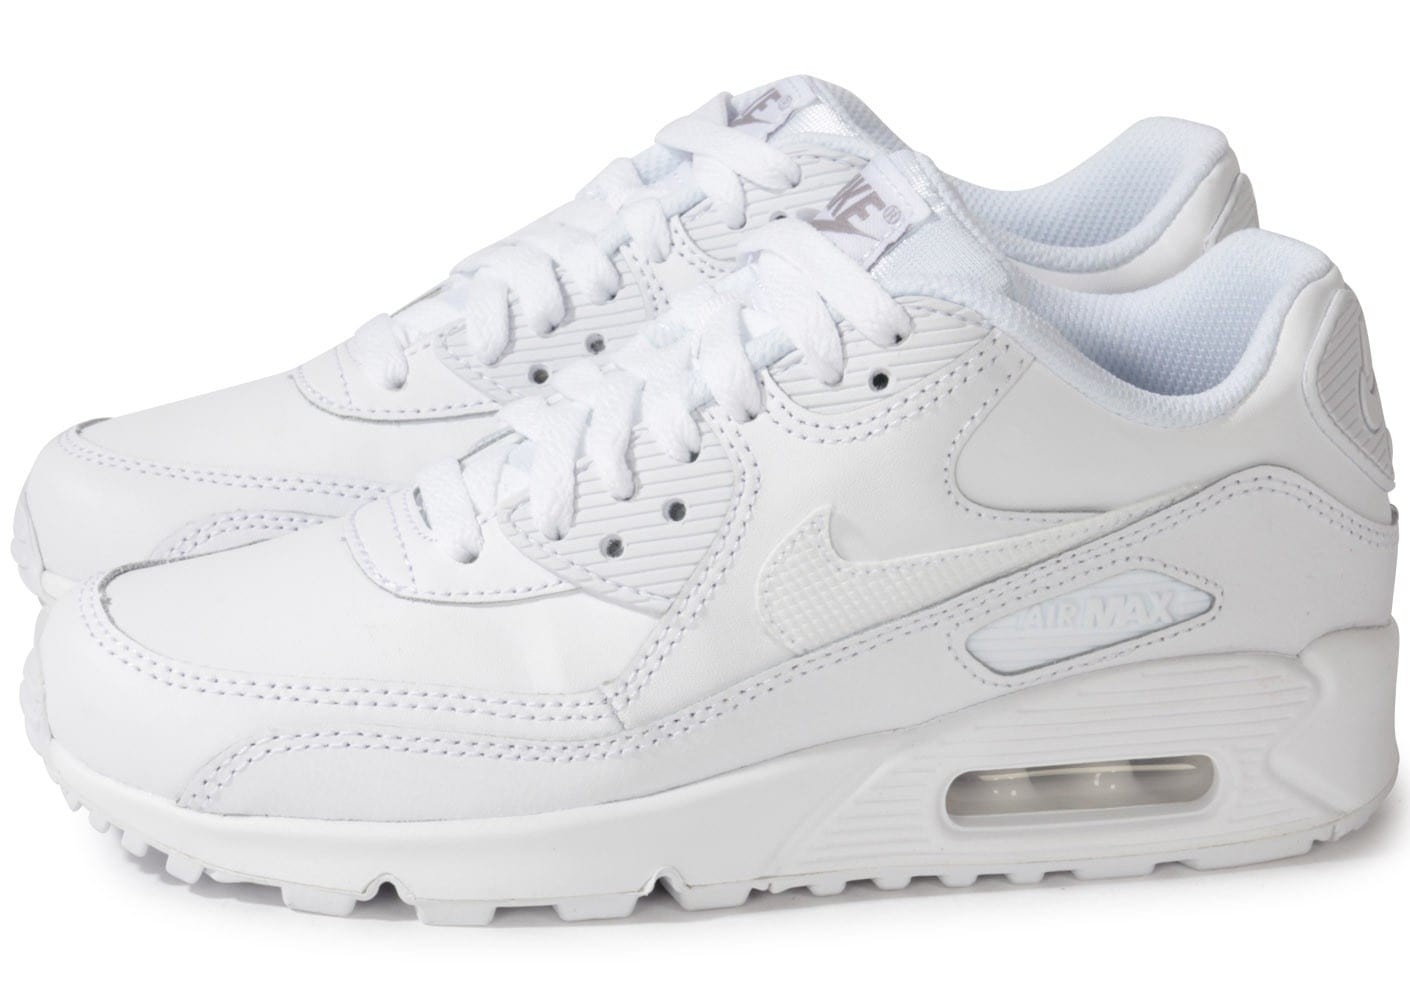 nike air max 90 femme blanche,Nike AIR MAX 90 LEATHER Blanc - Chaussures  Baskets basses Homme